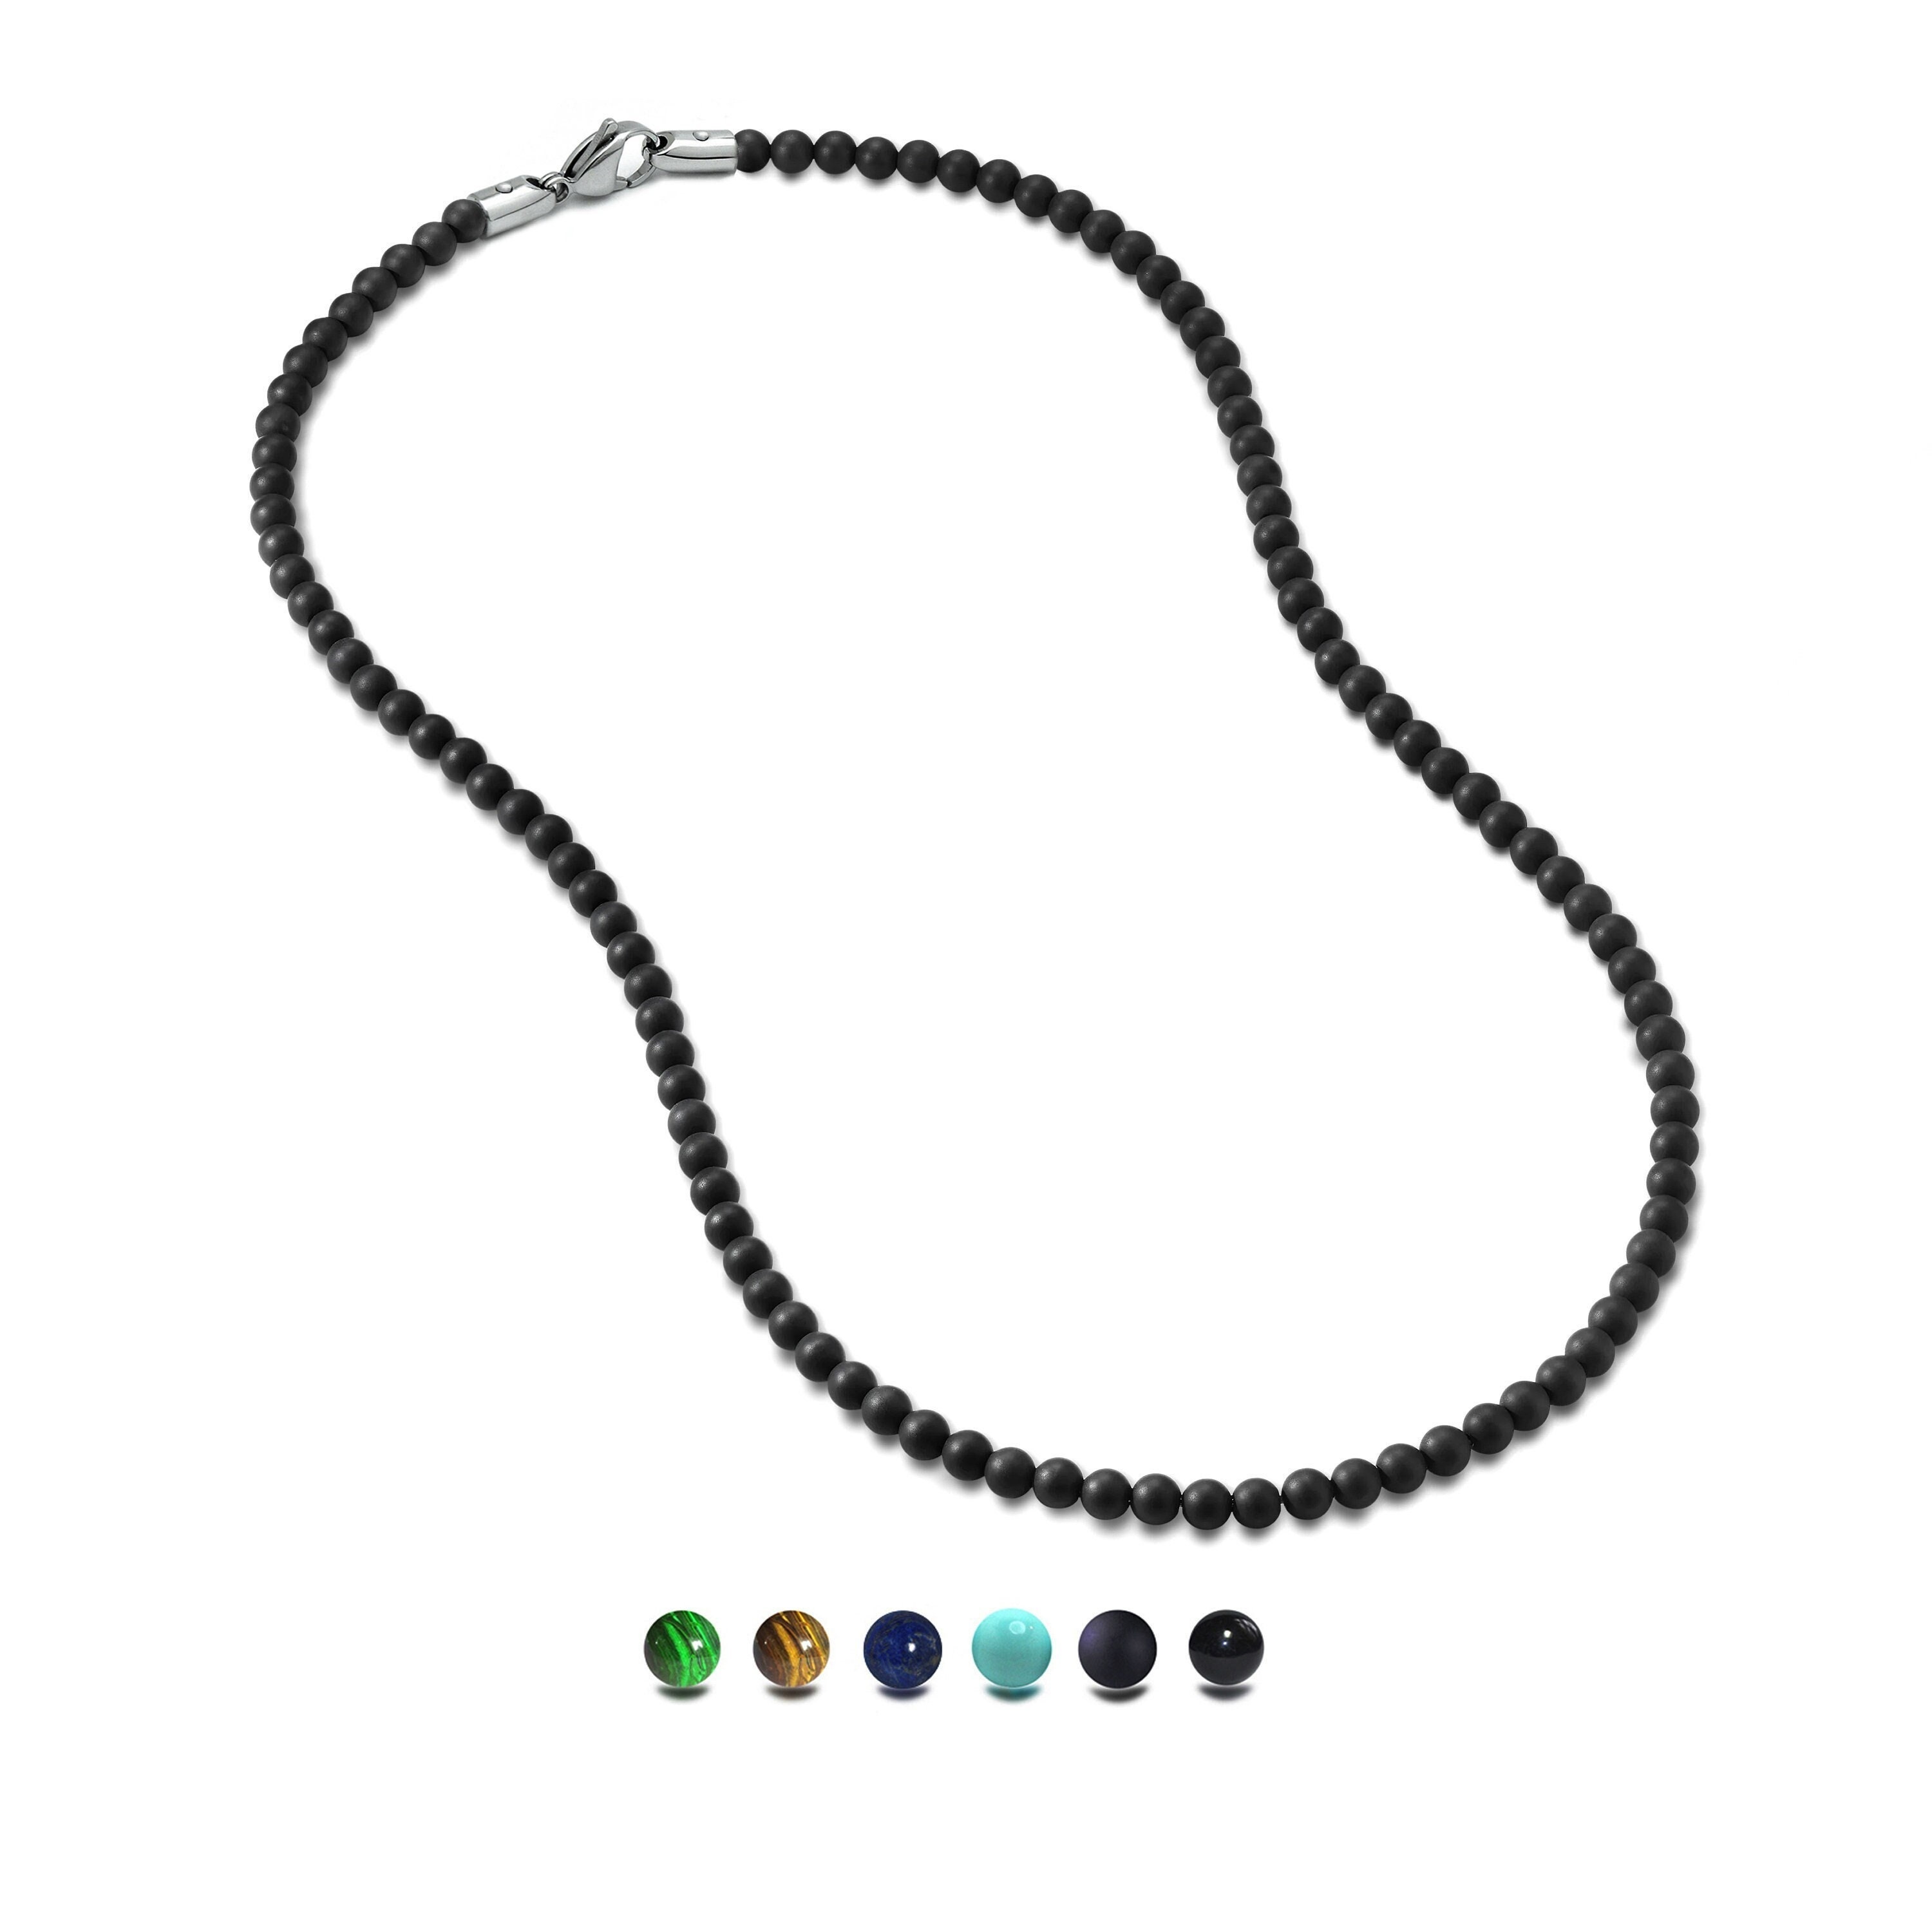 2 in 1 Beaded Necklace - Threaded Metal